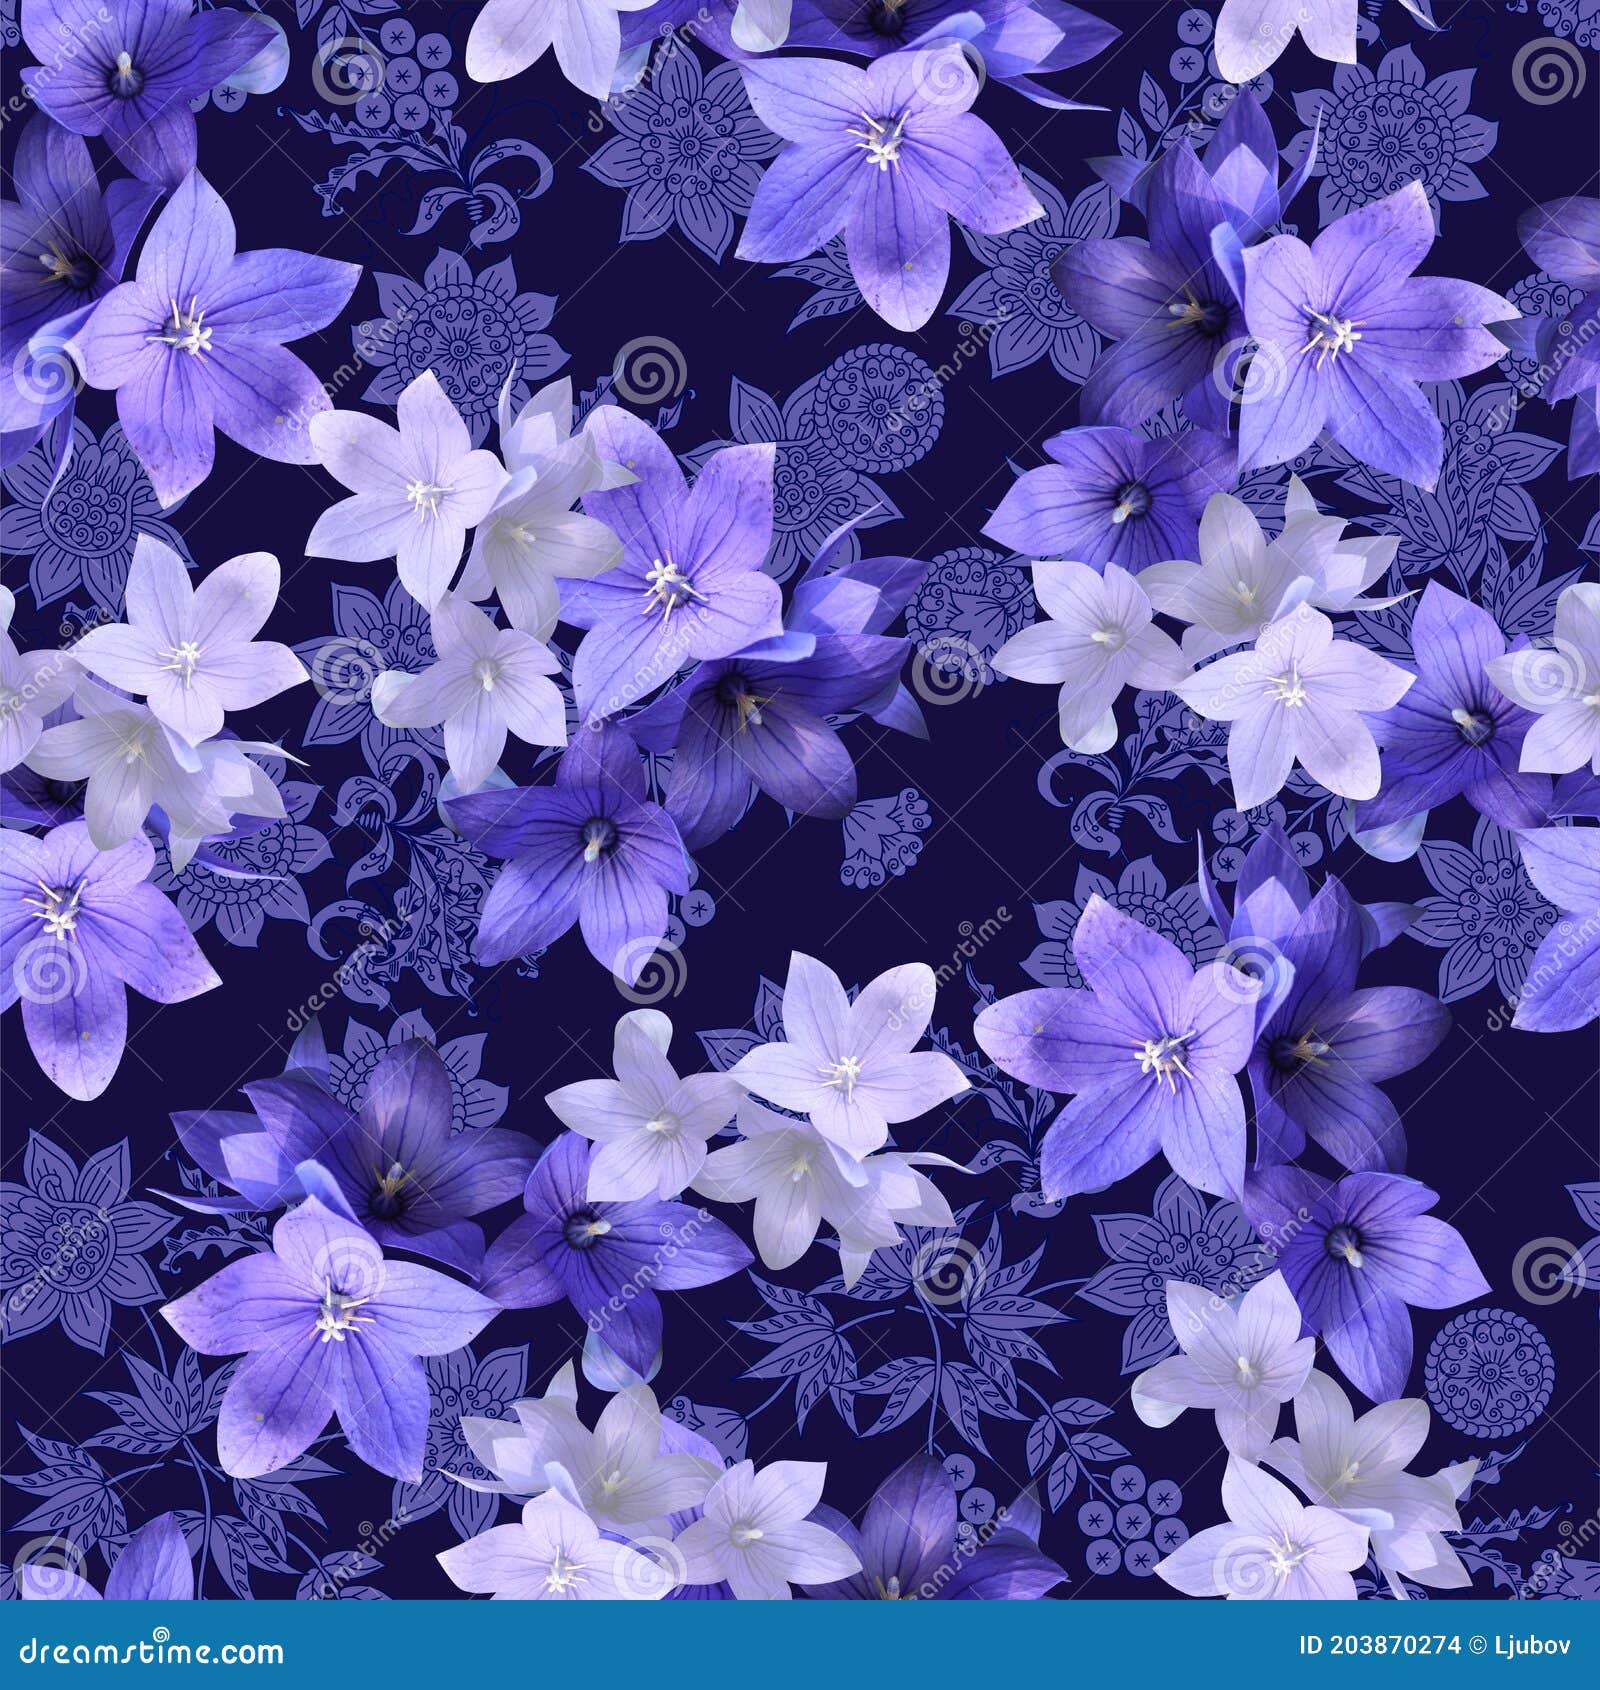 Pretty Floral Seamless Pattern with Beautiful Violet Bellflowers. Print for  Fabric, Curtains, Wallpaper Stock Illustration - Illustration of flowers,  beautiful: 203870274